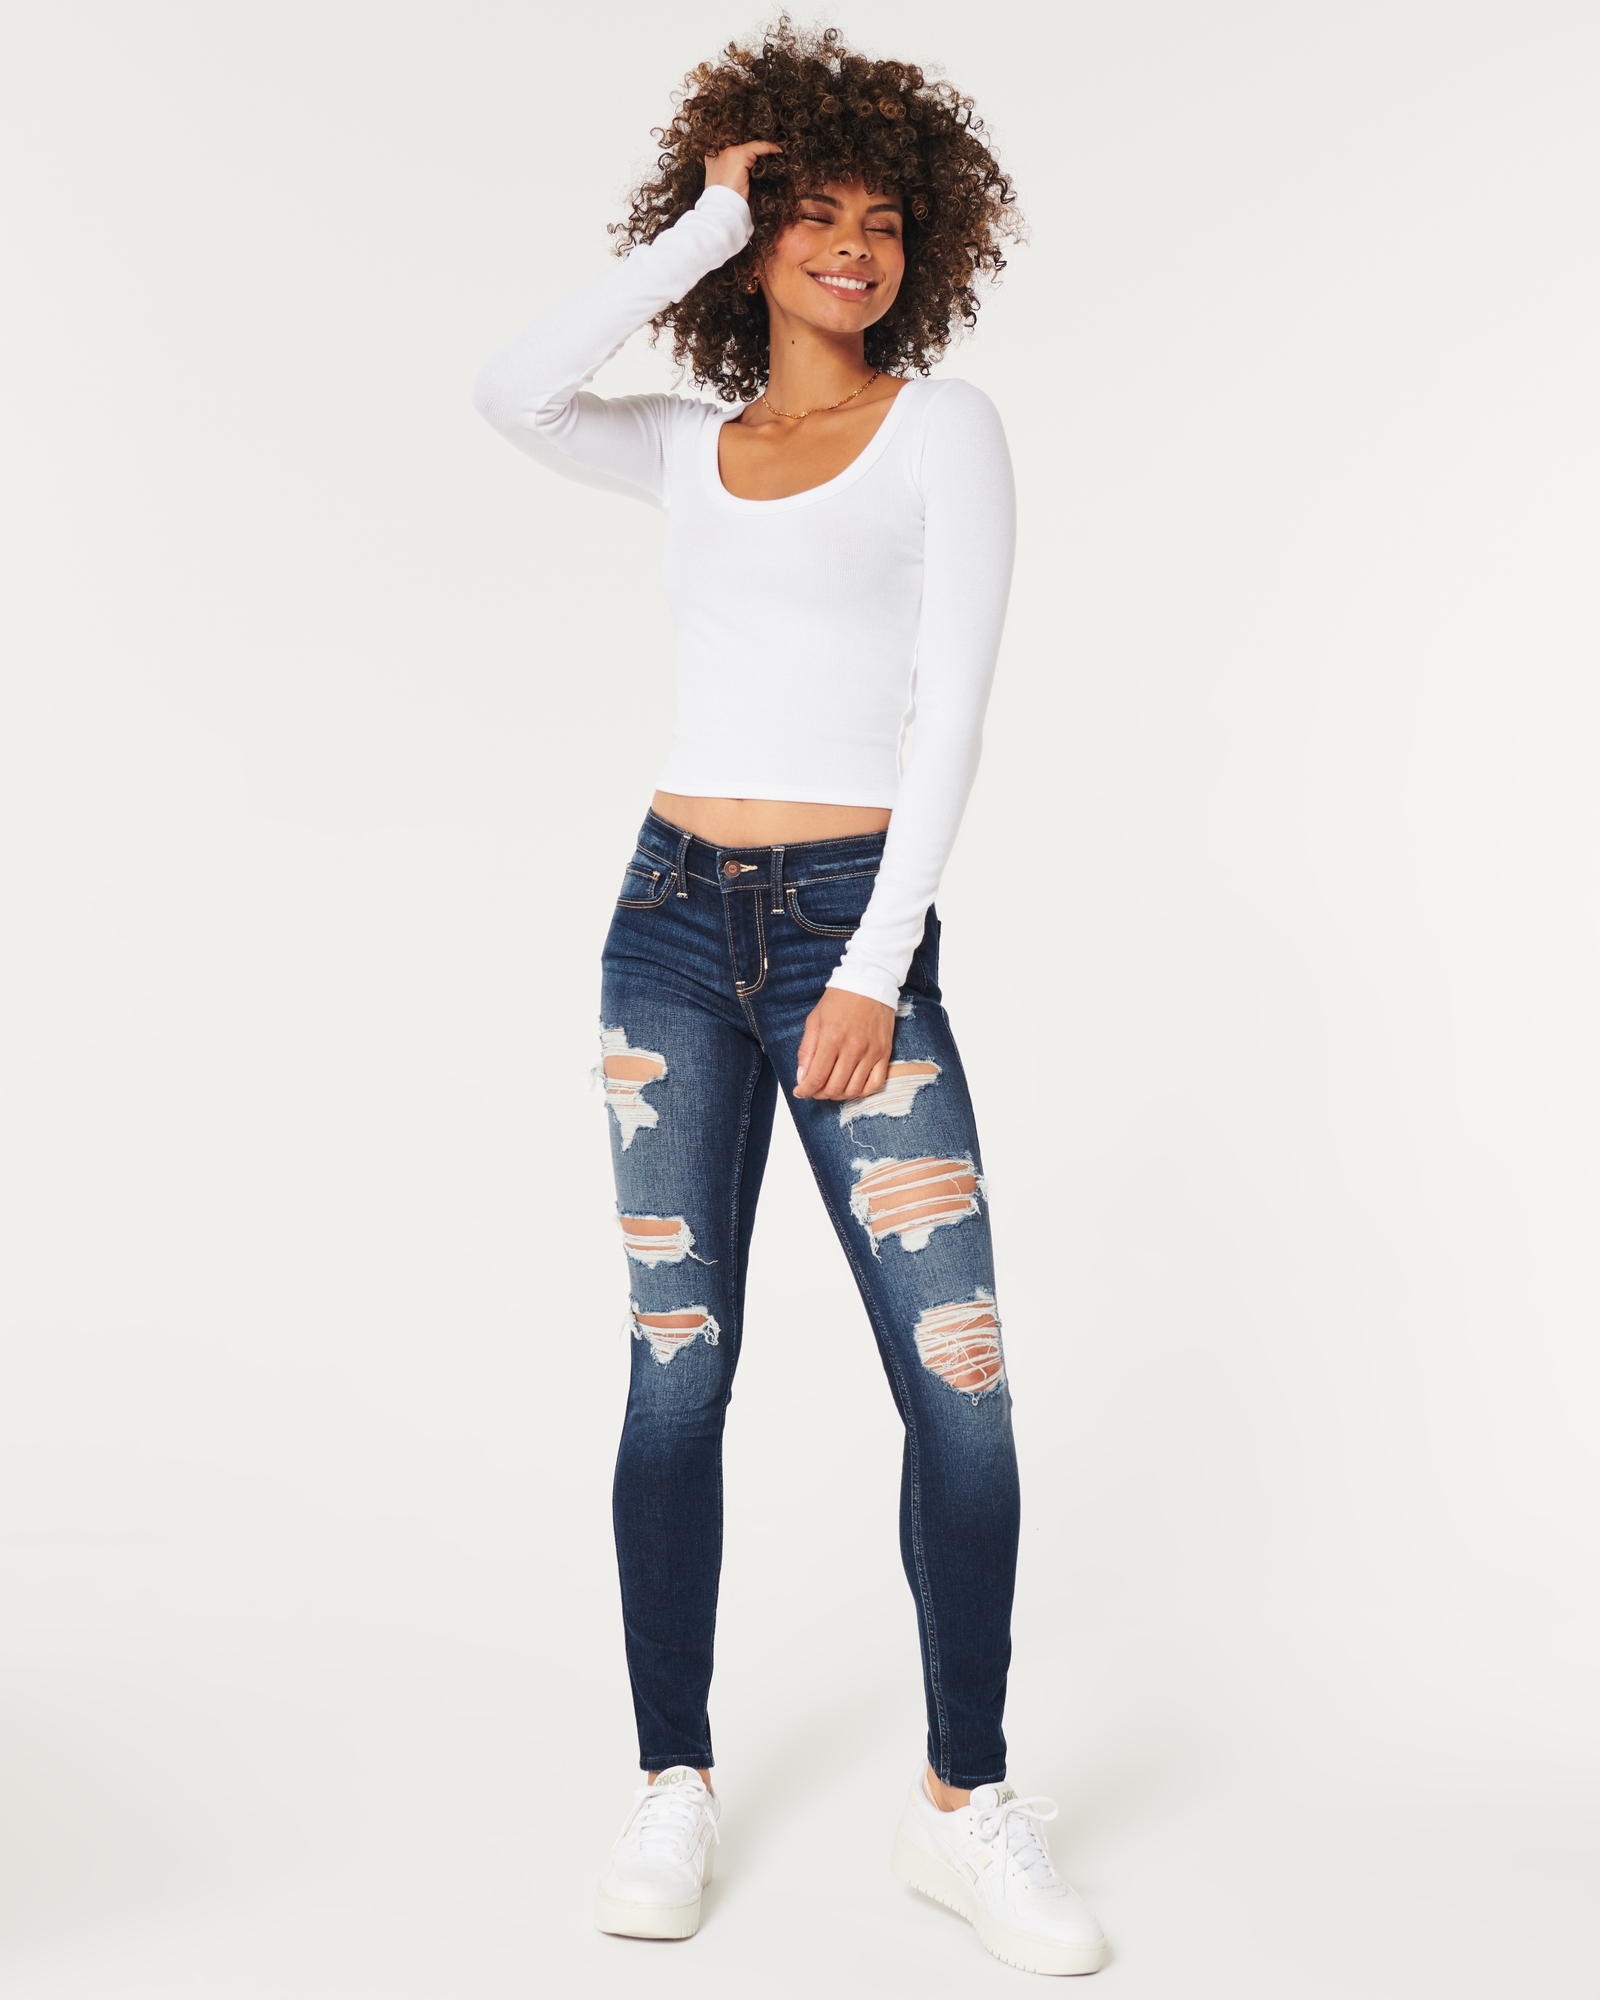 https://img.hollisterco.com/is/image/anf/KIC_355-3358-0838-279_model1.jpg?policy=product-extra-large